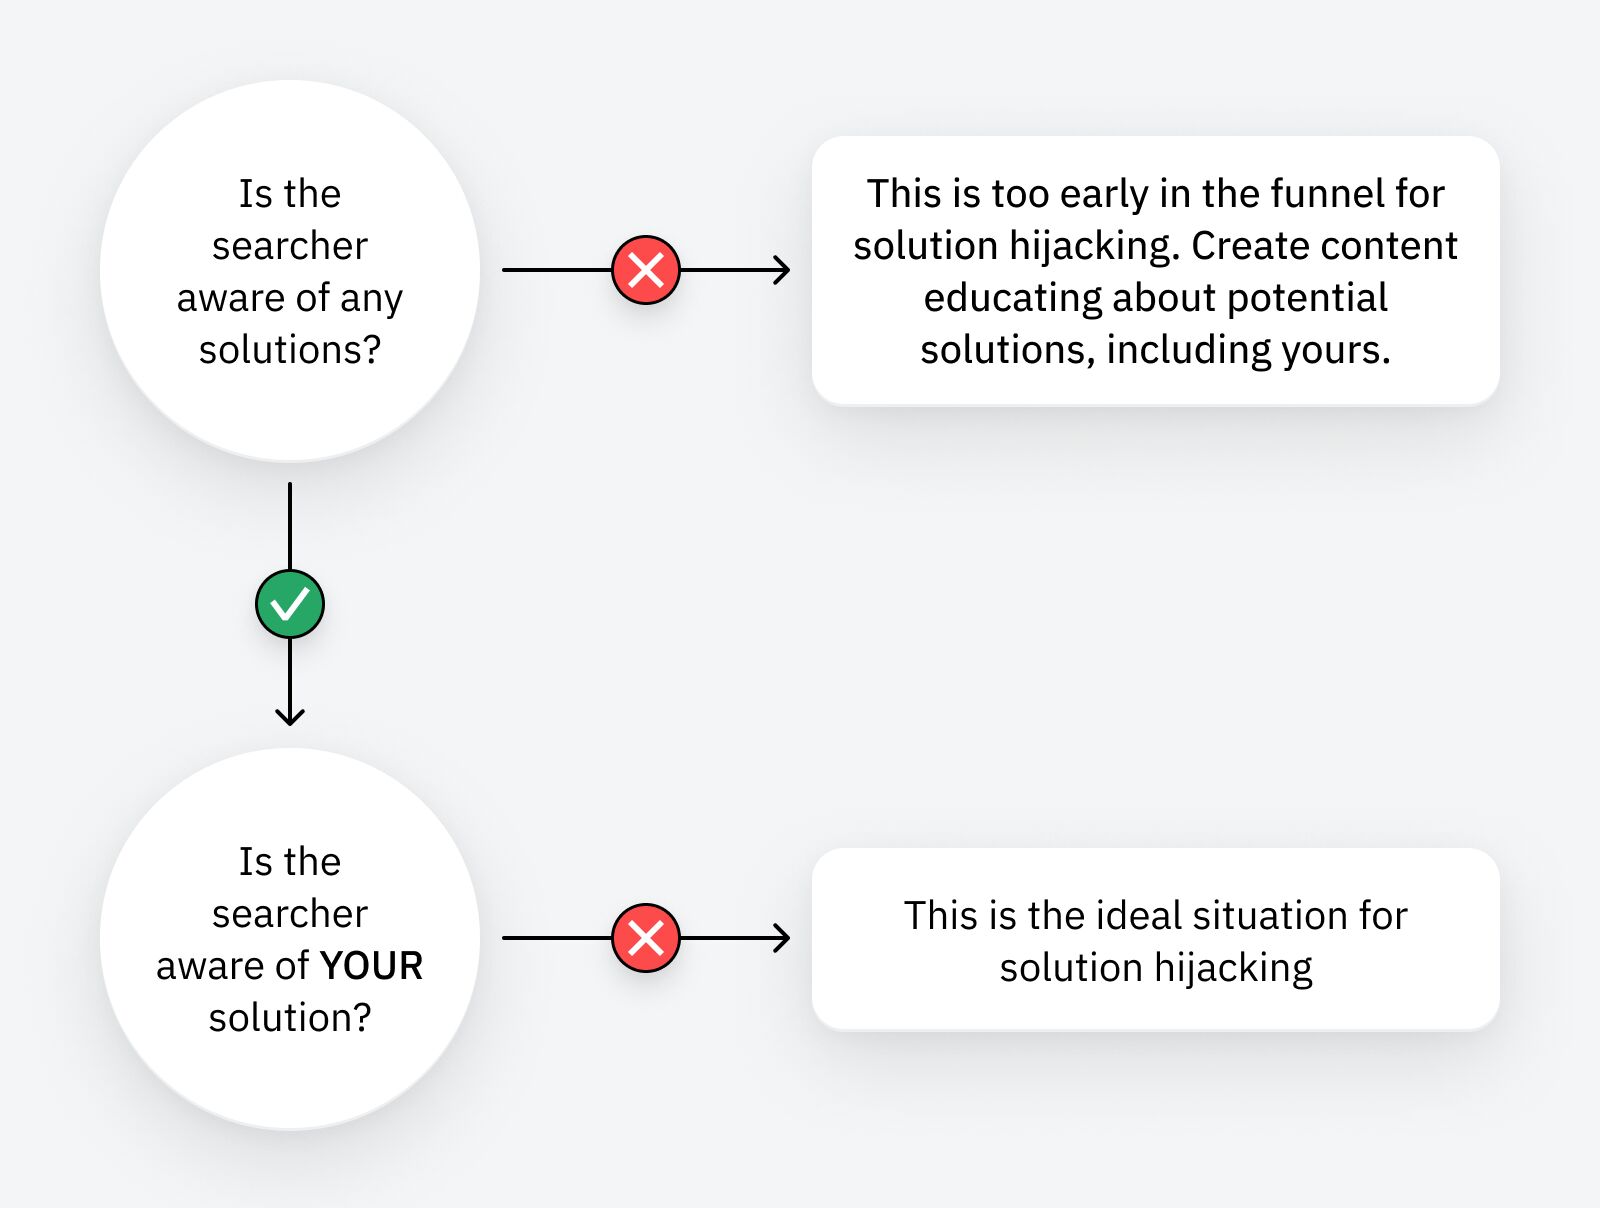 Decision tree indicating that solution hijacking is a good fit if a searcher is already solution aware but not for your solution.